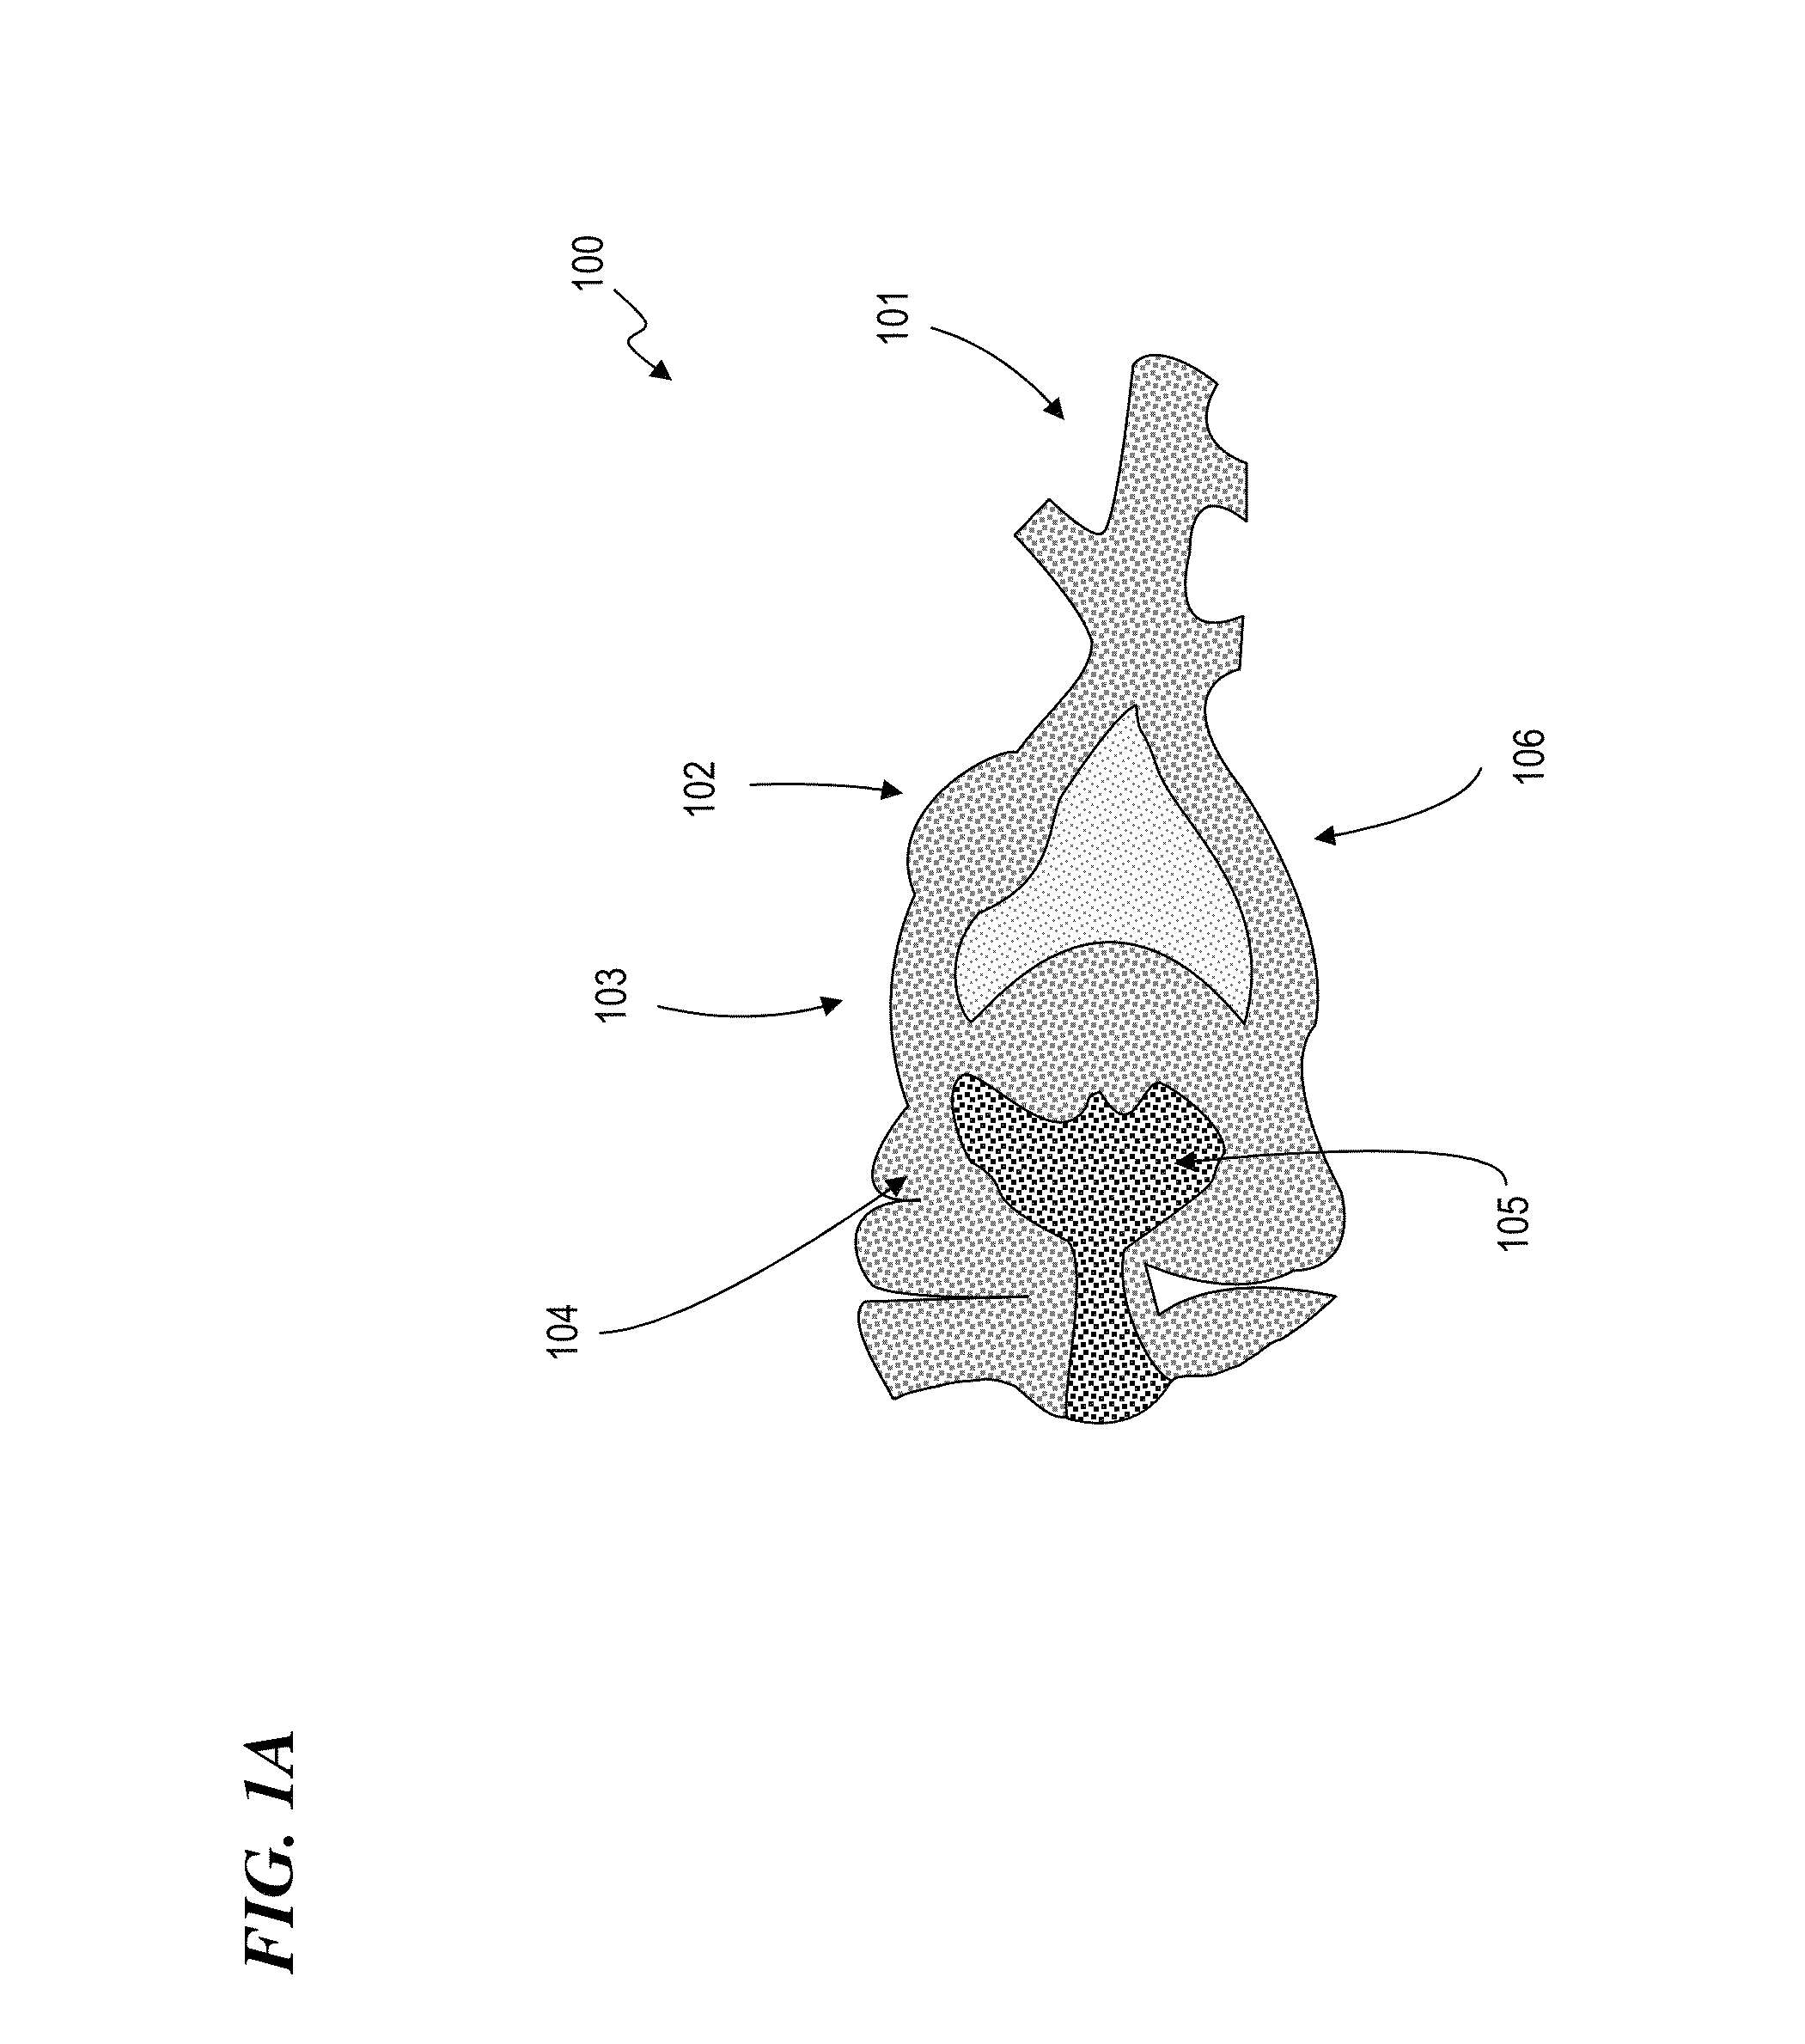 Apparatus and method for managing chronic pain with infrared and low-level light sources